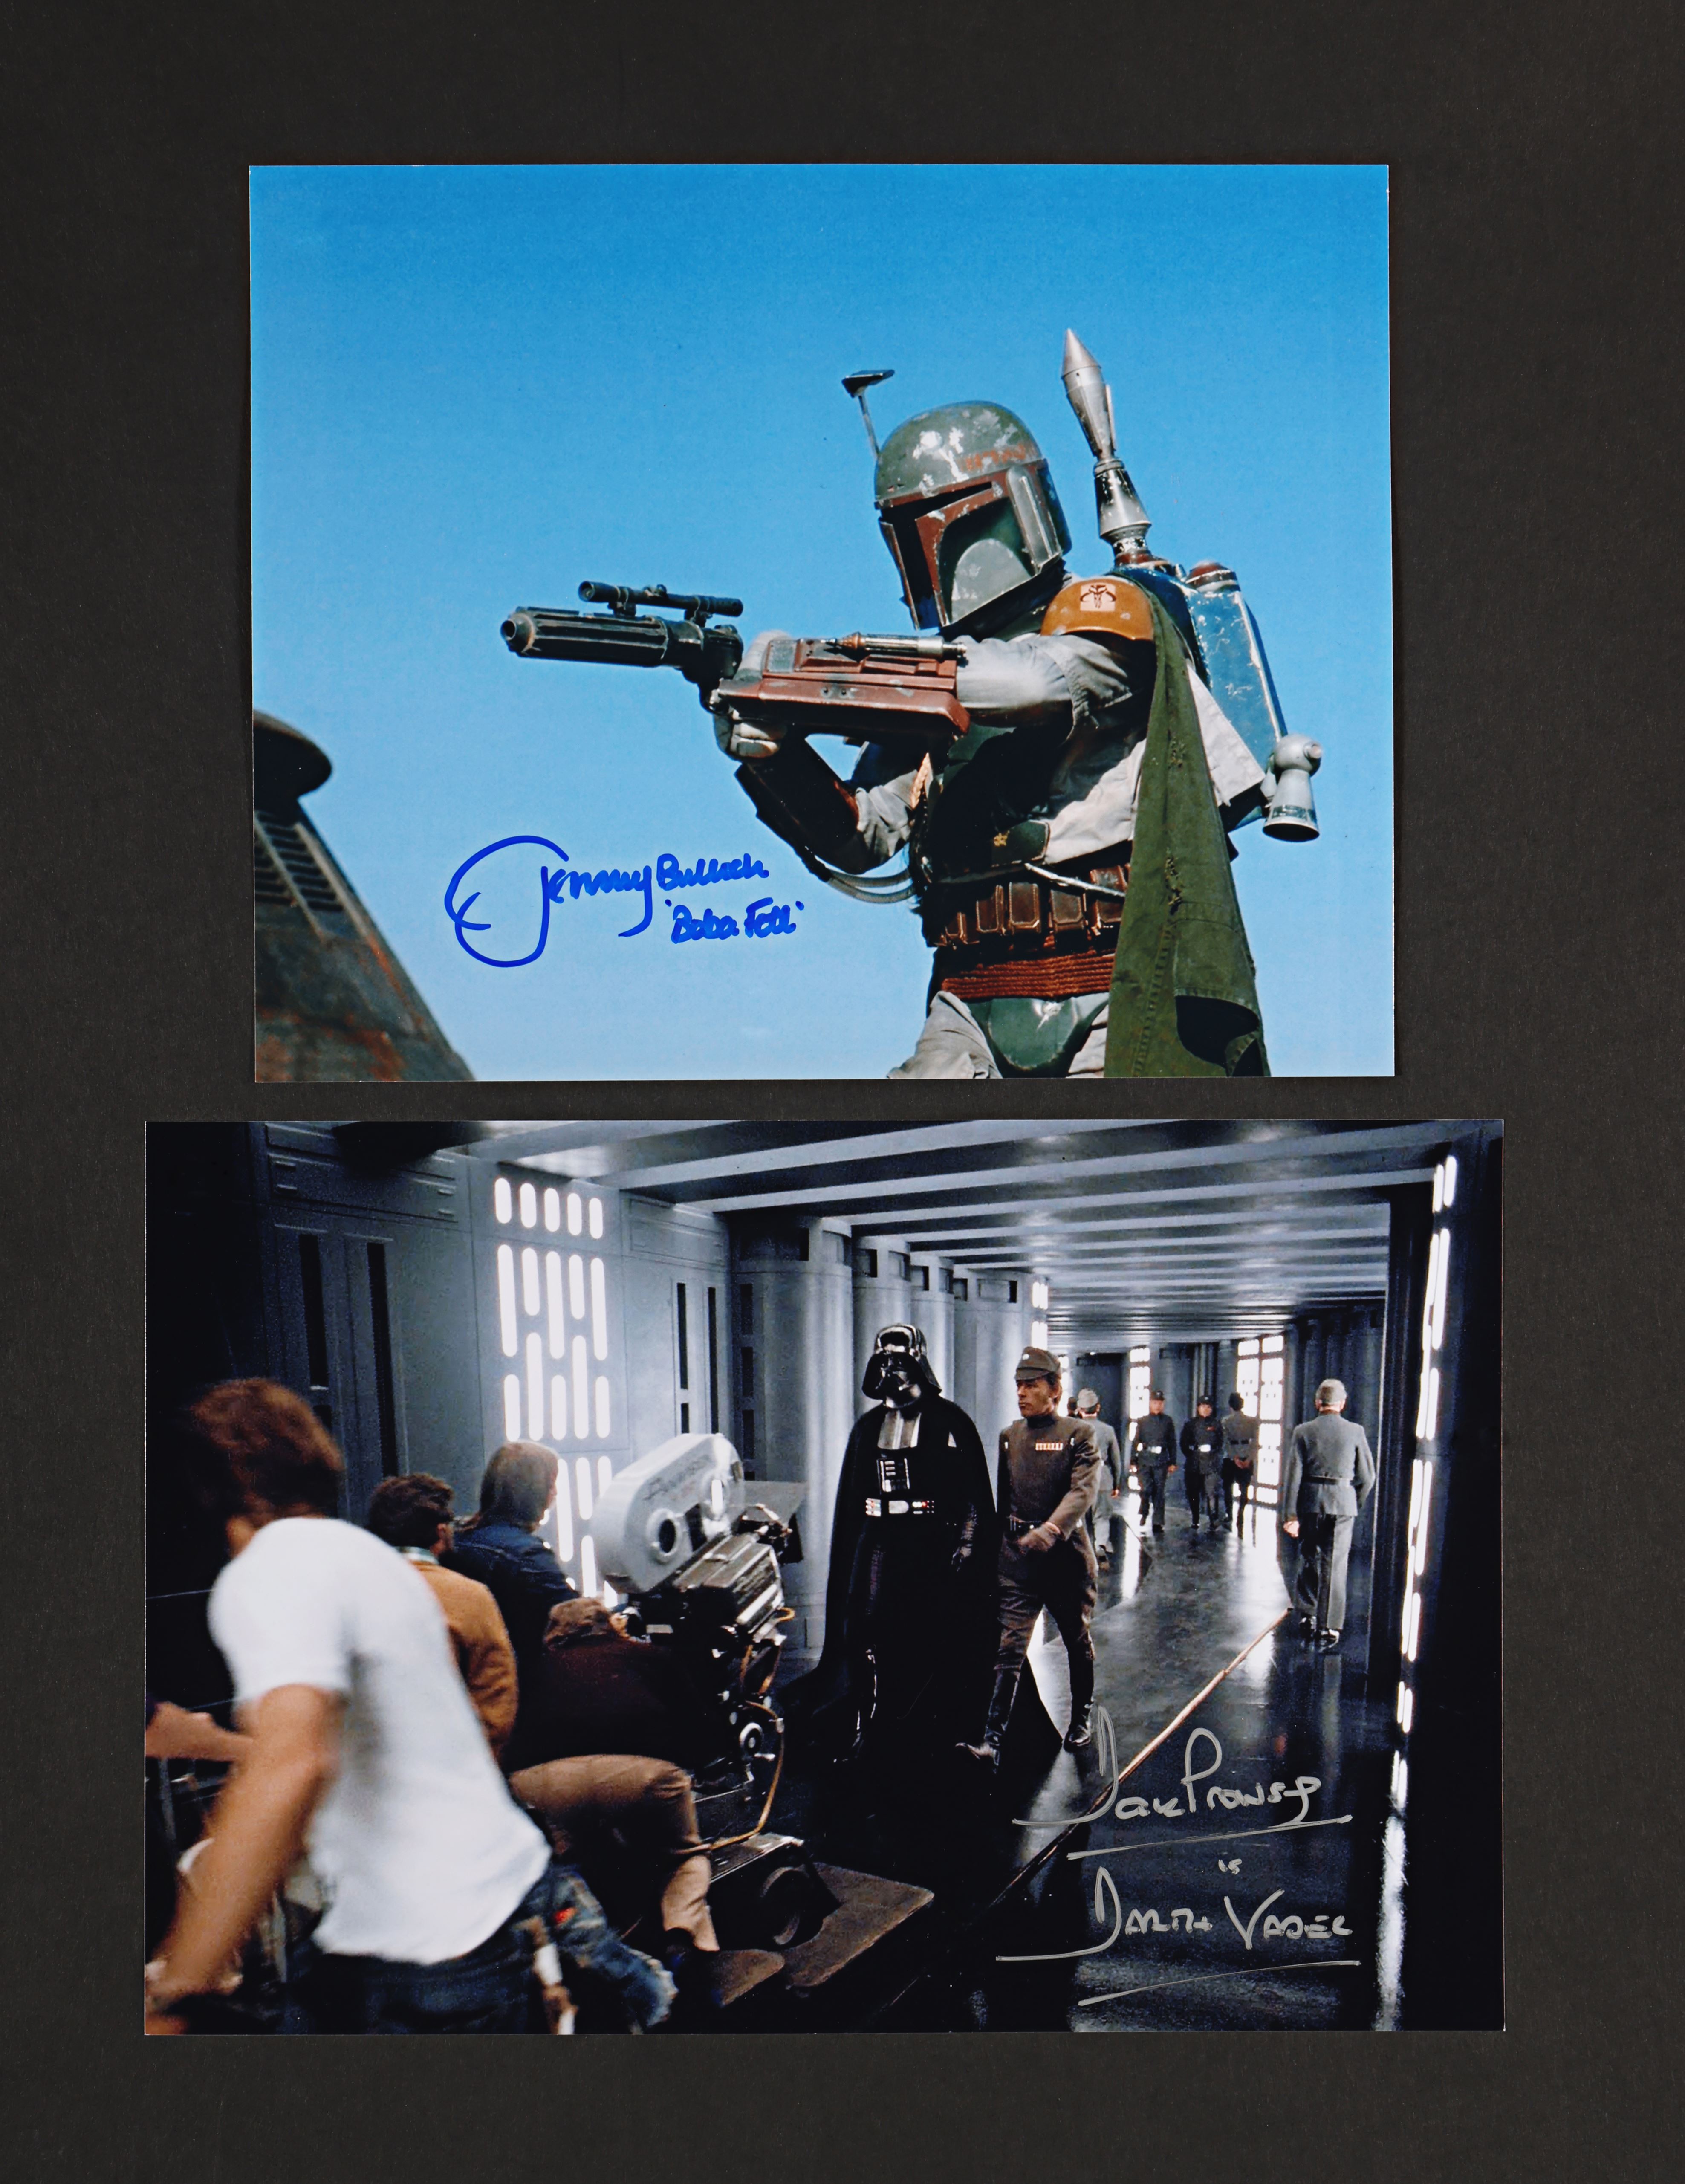 STAR WARS ORIGINAL TRILOGY (1977-83) - Dave Prowse and Jeremy Bulloch Autographed Photographs